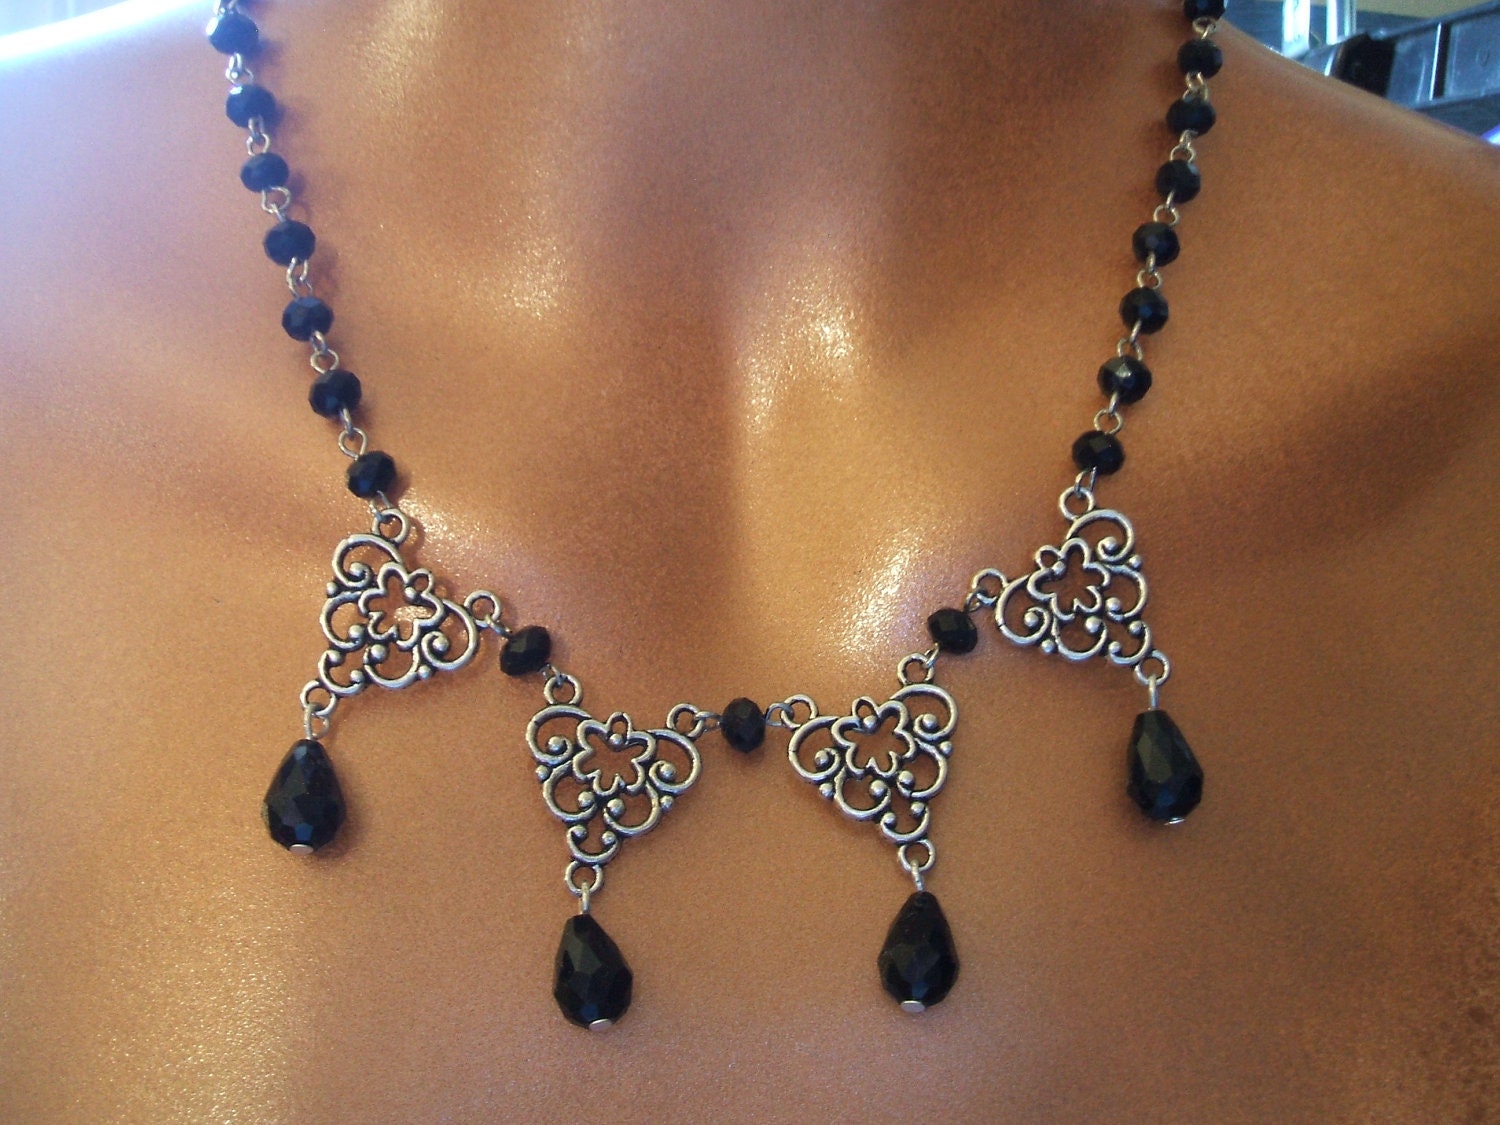 Black Crystal Beaded Necklace w/ Silver Charms & by DeluxeAGoGo